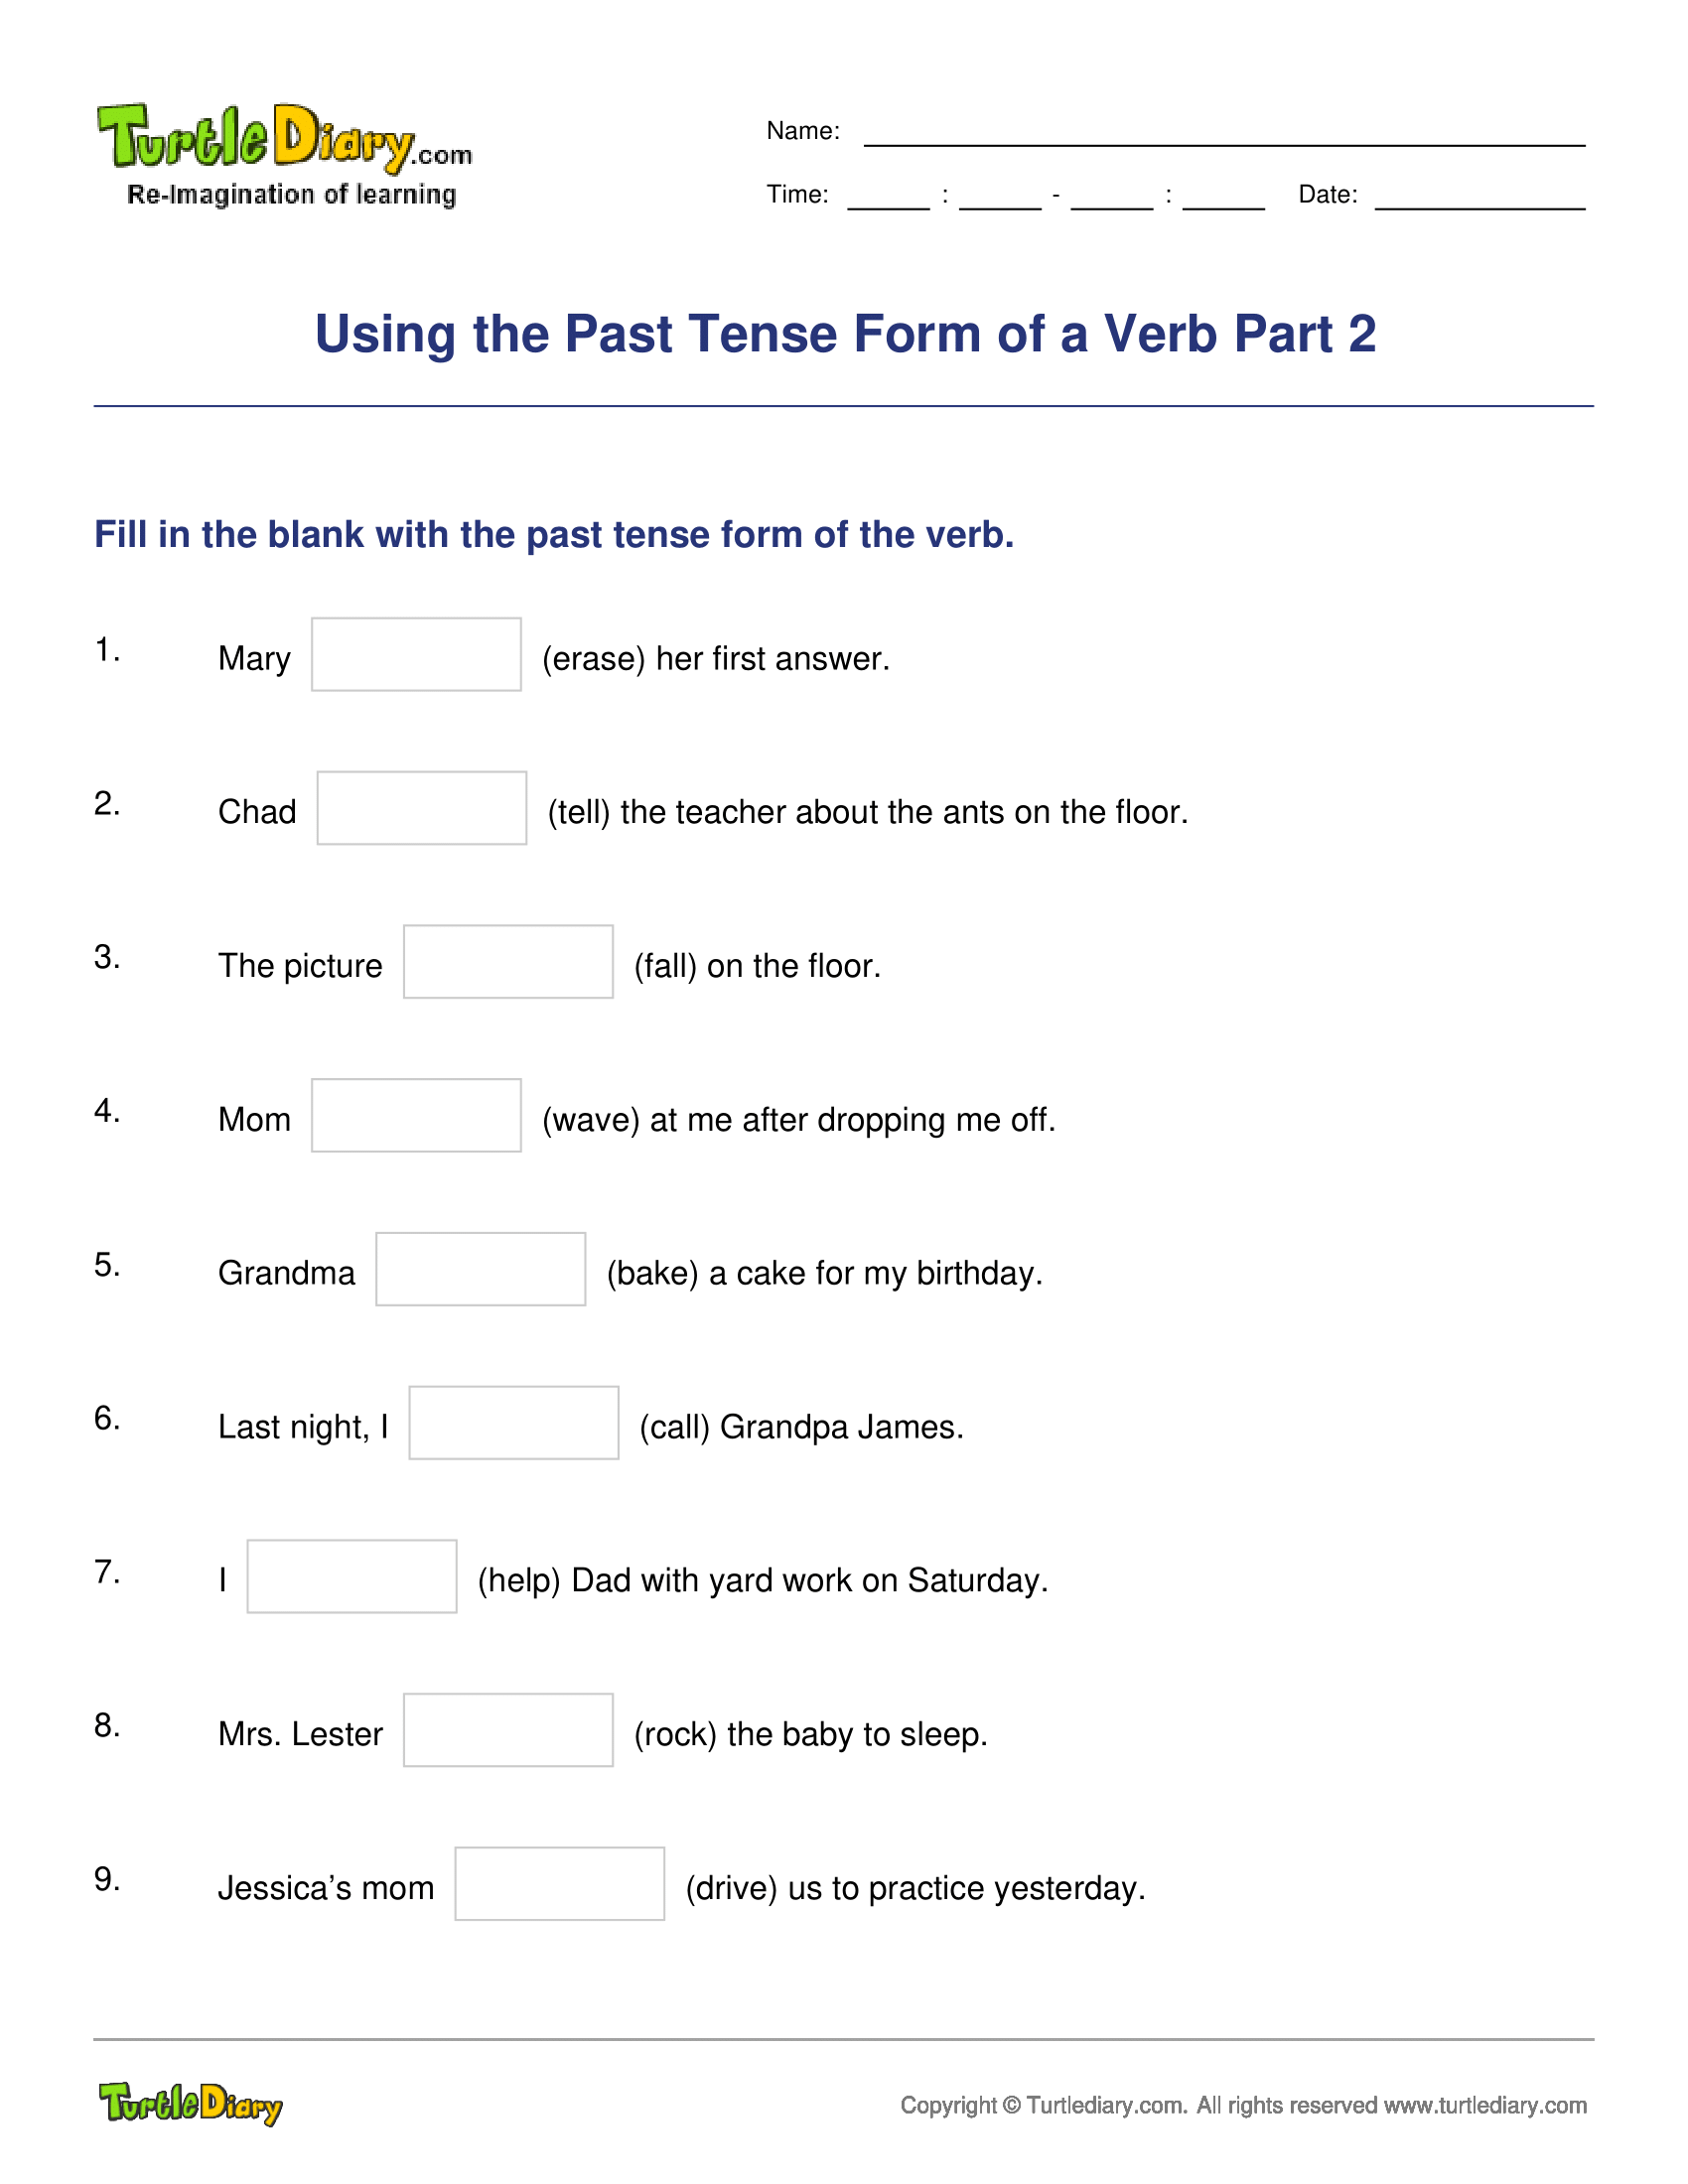 Using the Past Tense Form of a Verb Part 2